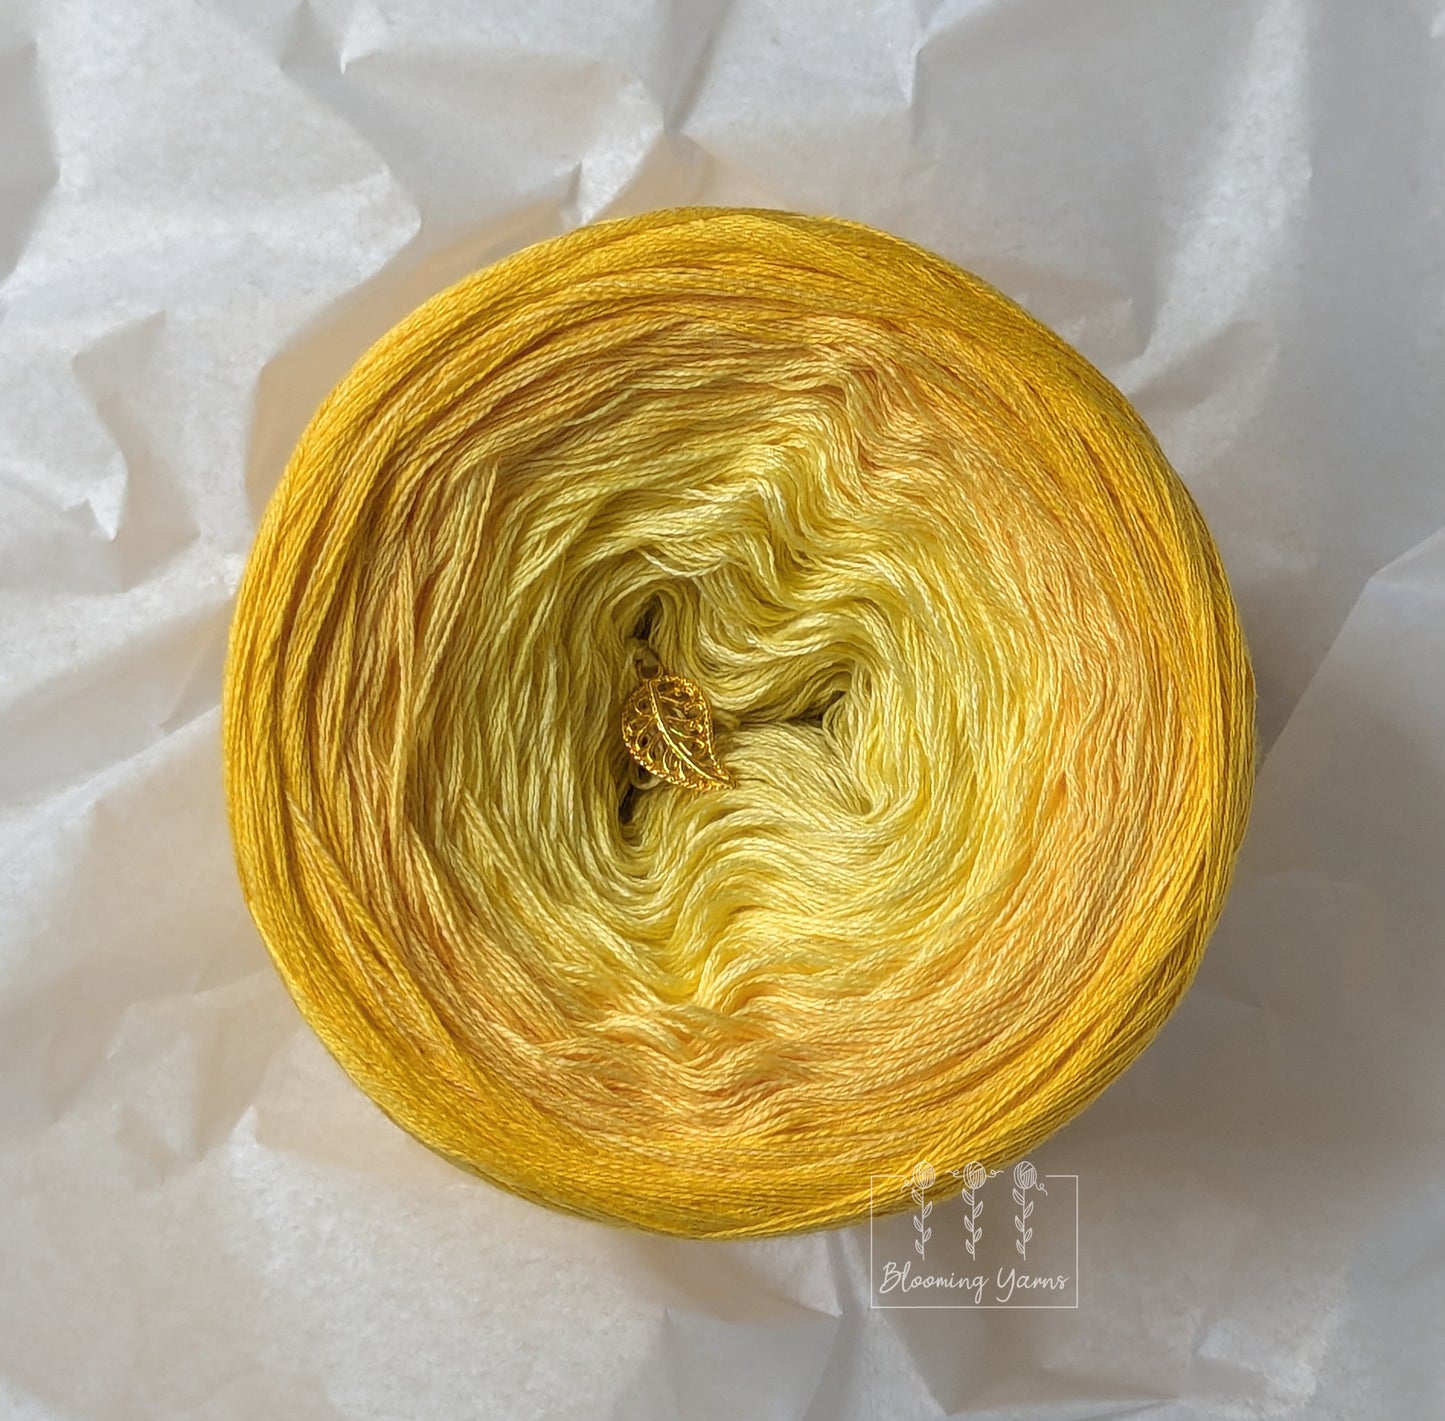 C329 cotton/acrylic ombre yarn cake, normal style, 170g, about 850m, 3ply